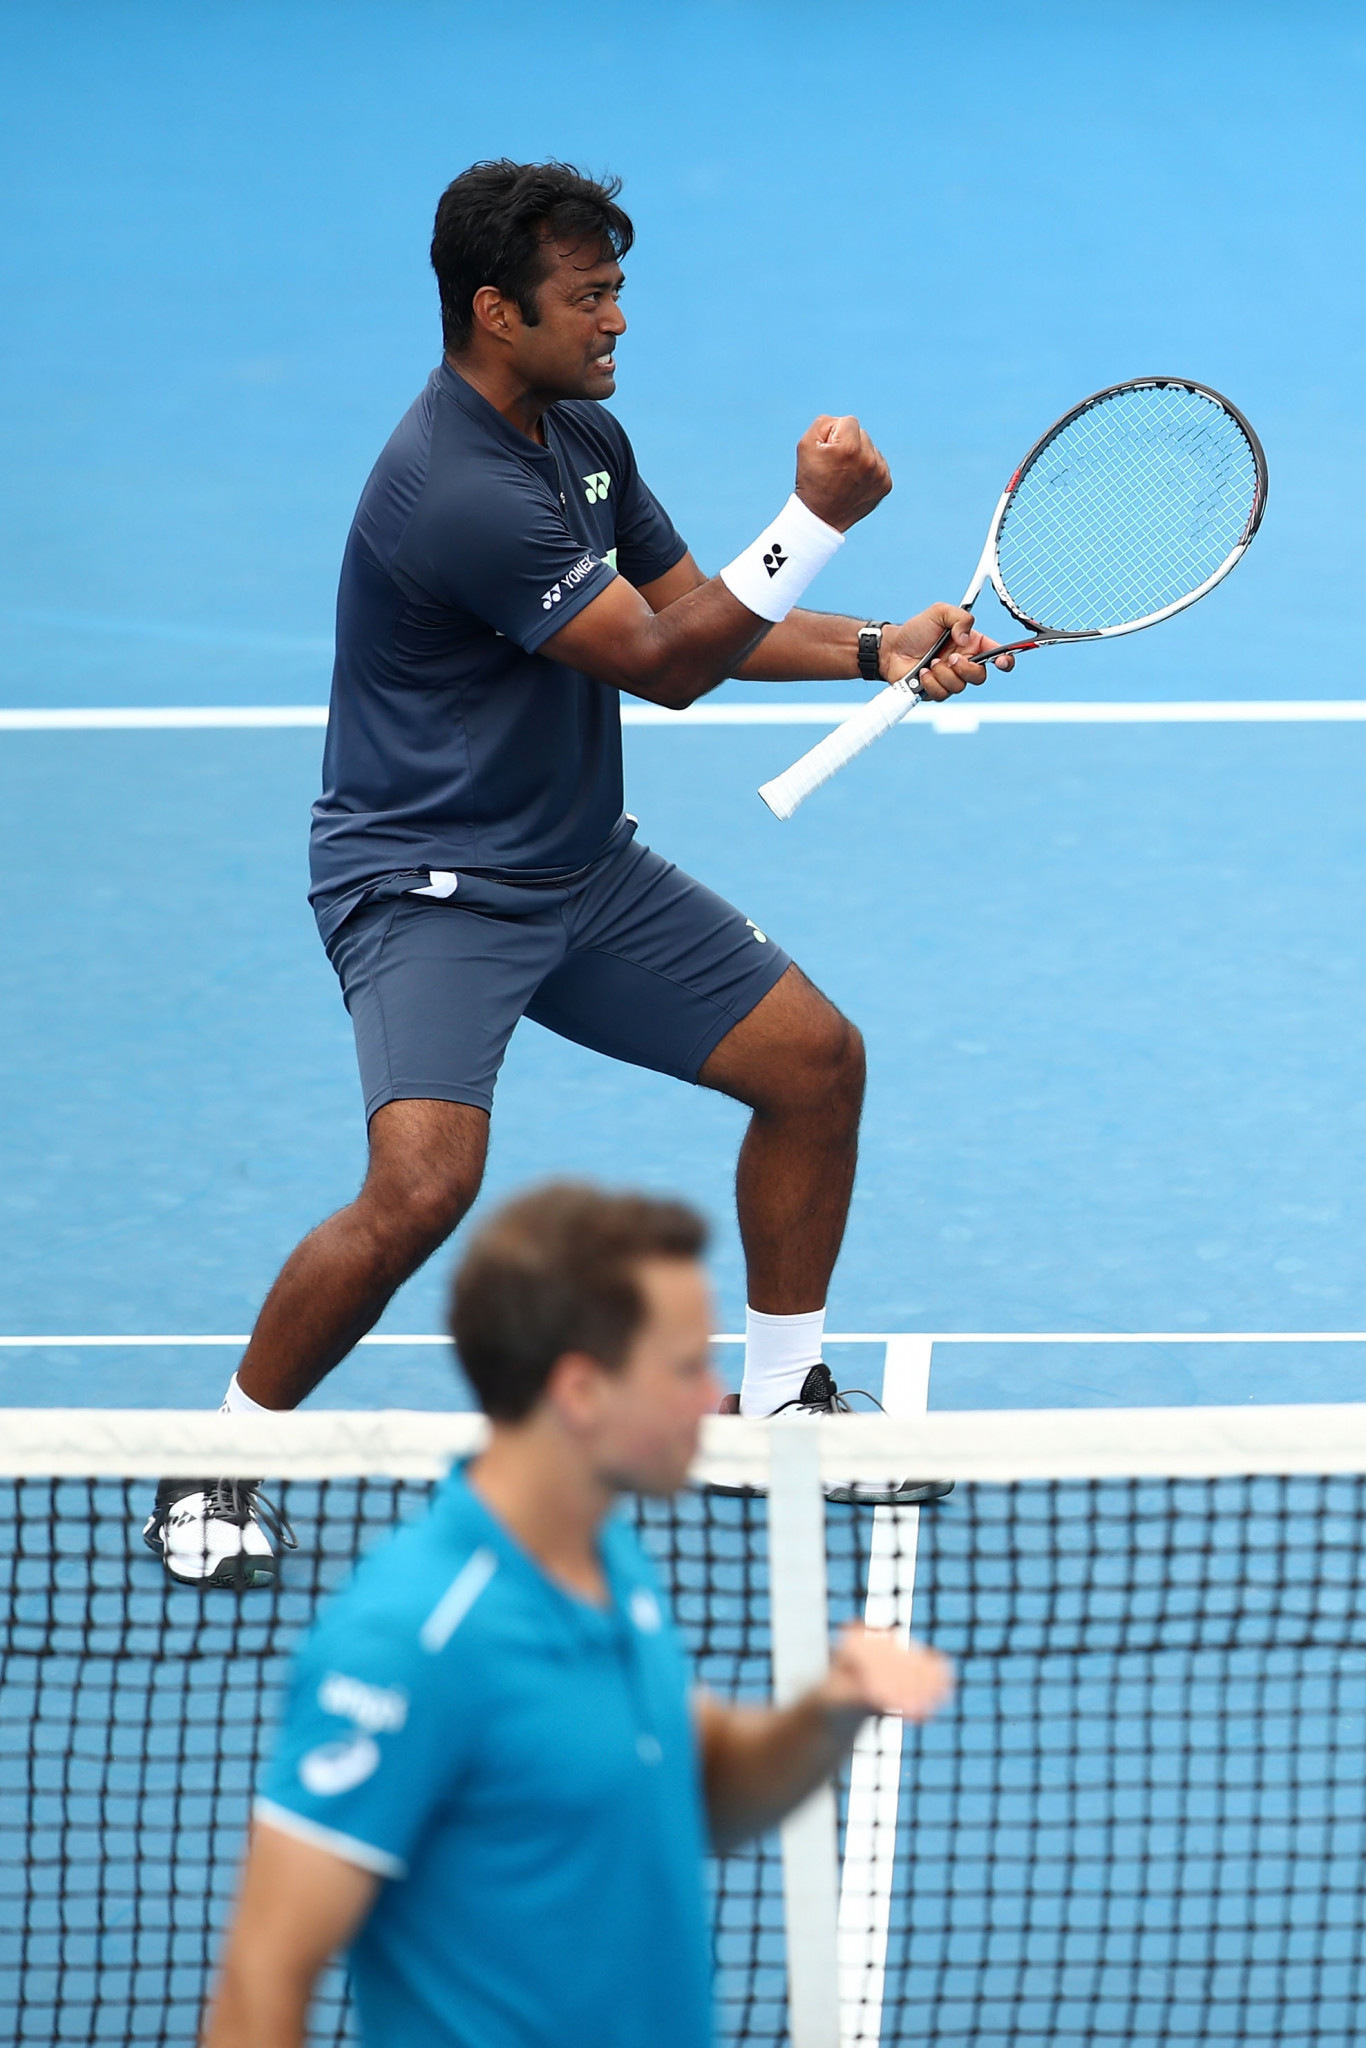 At 45, Leander Paes has his eyes on a record eighth Olympic appearance at the Tokyo 2020 Games ©Getty Images